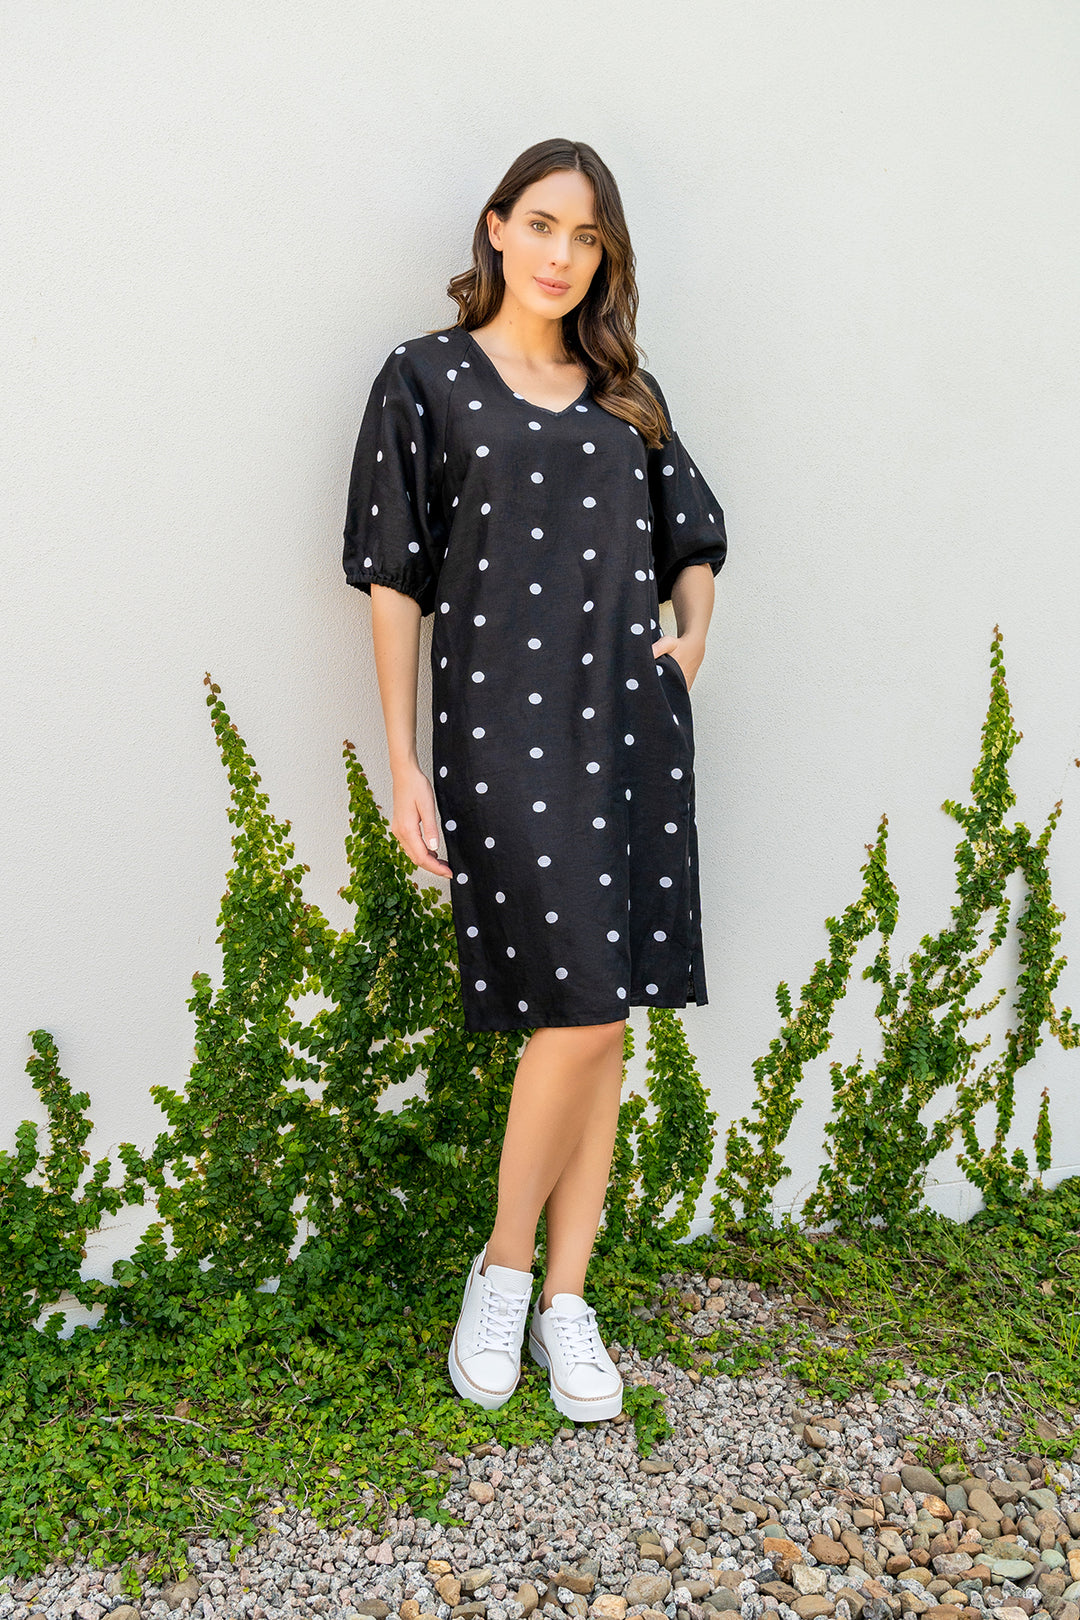 Black and white spot dress by See Saw clothing, sold and shipped from Pizazz Boutique Nelson Bay online women's clothes shops Australia